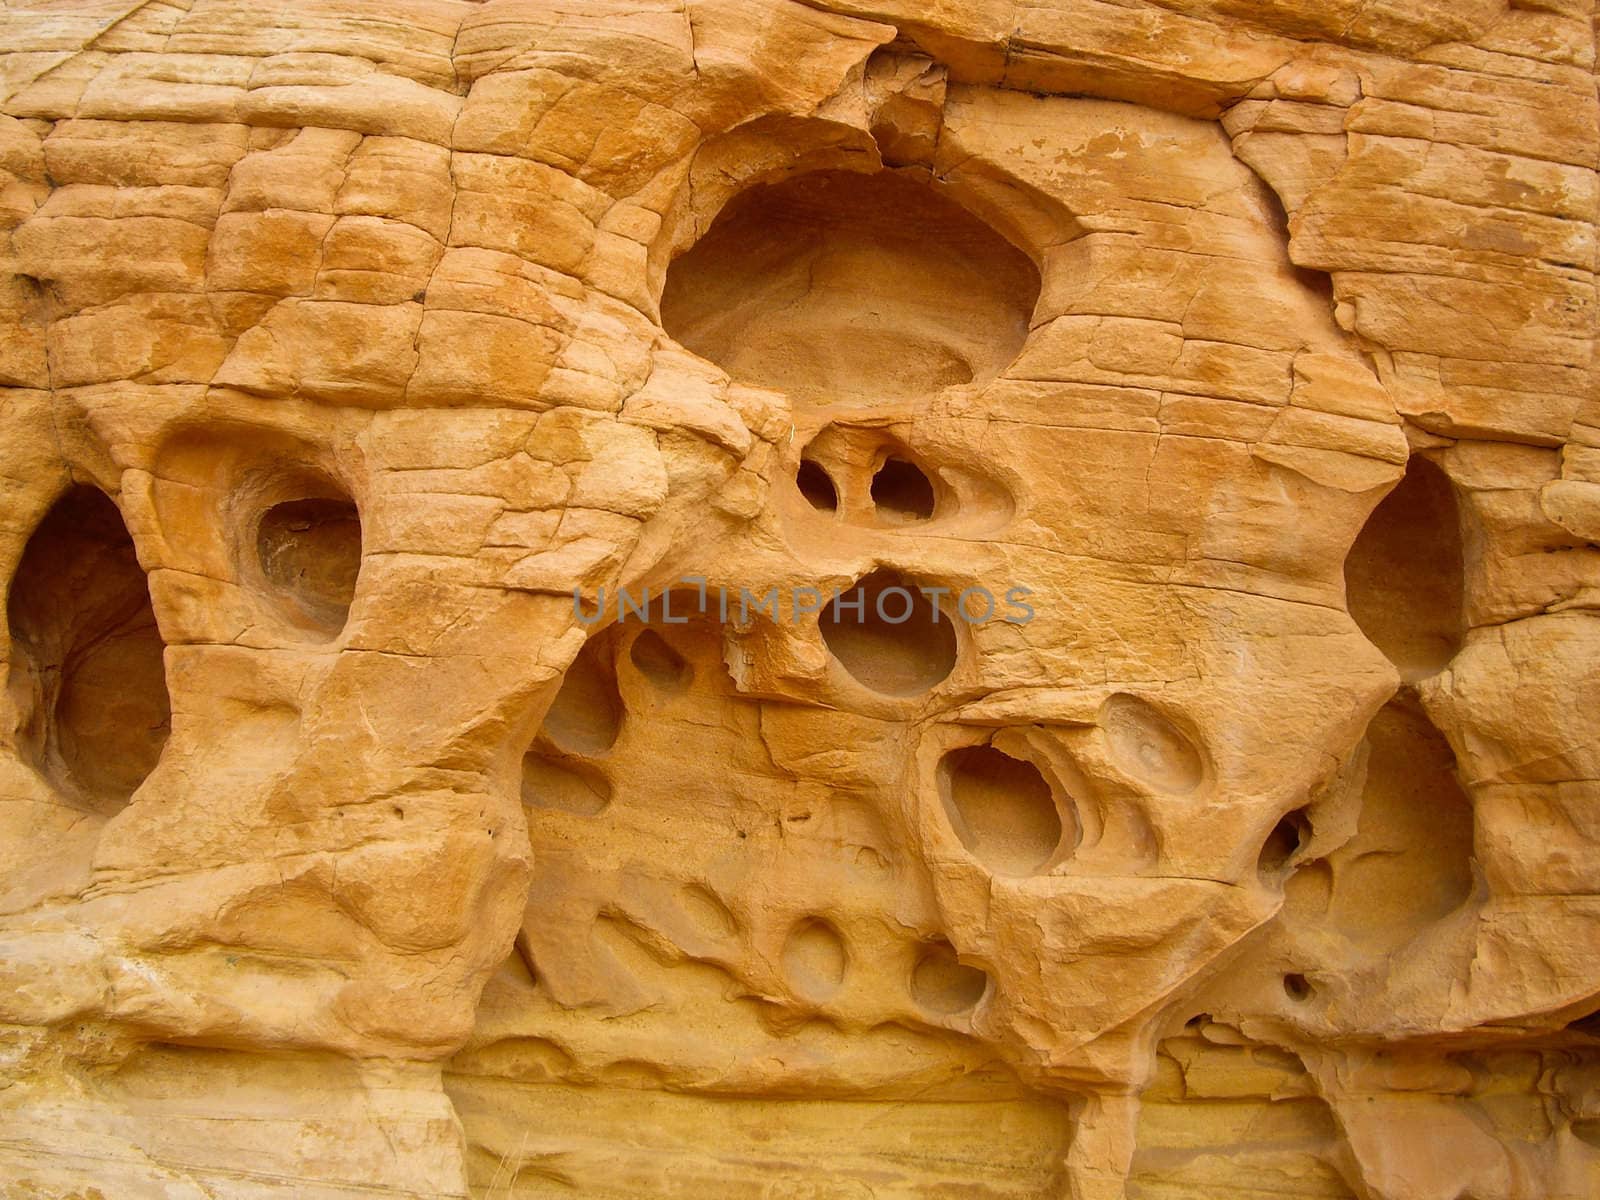 Erosion at work on sandstone formations